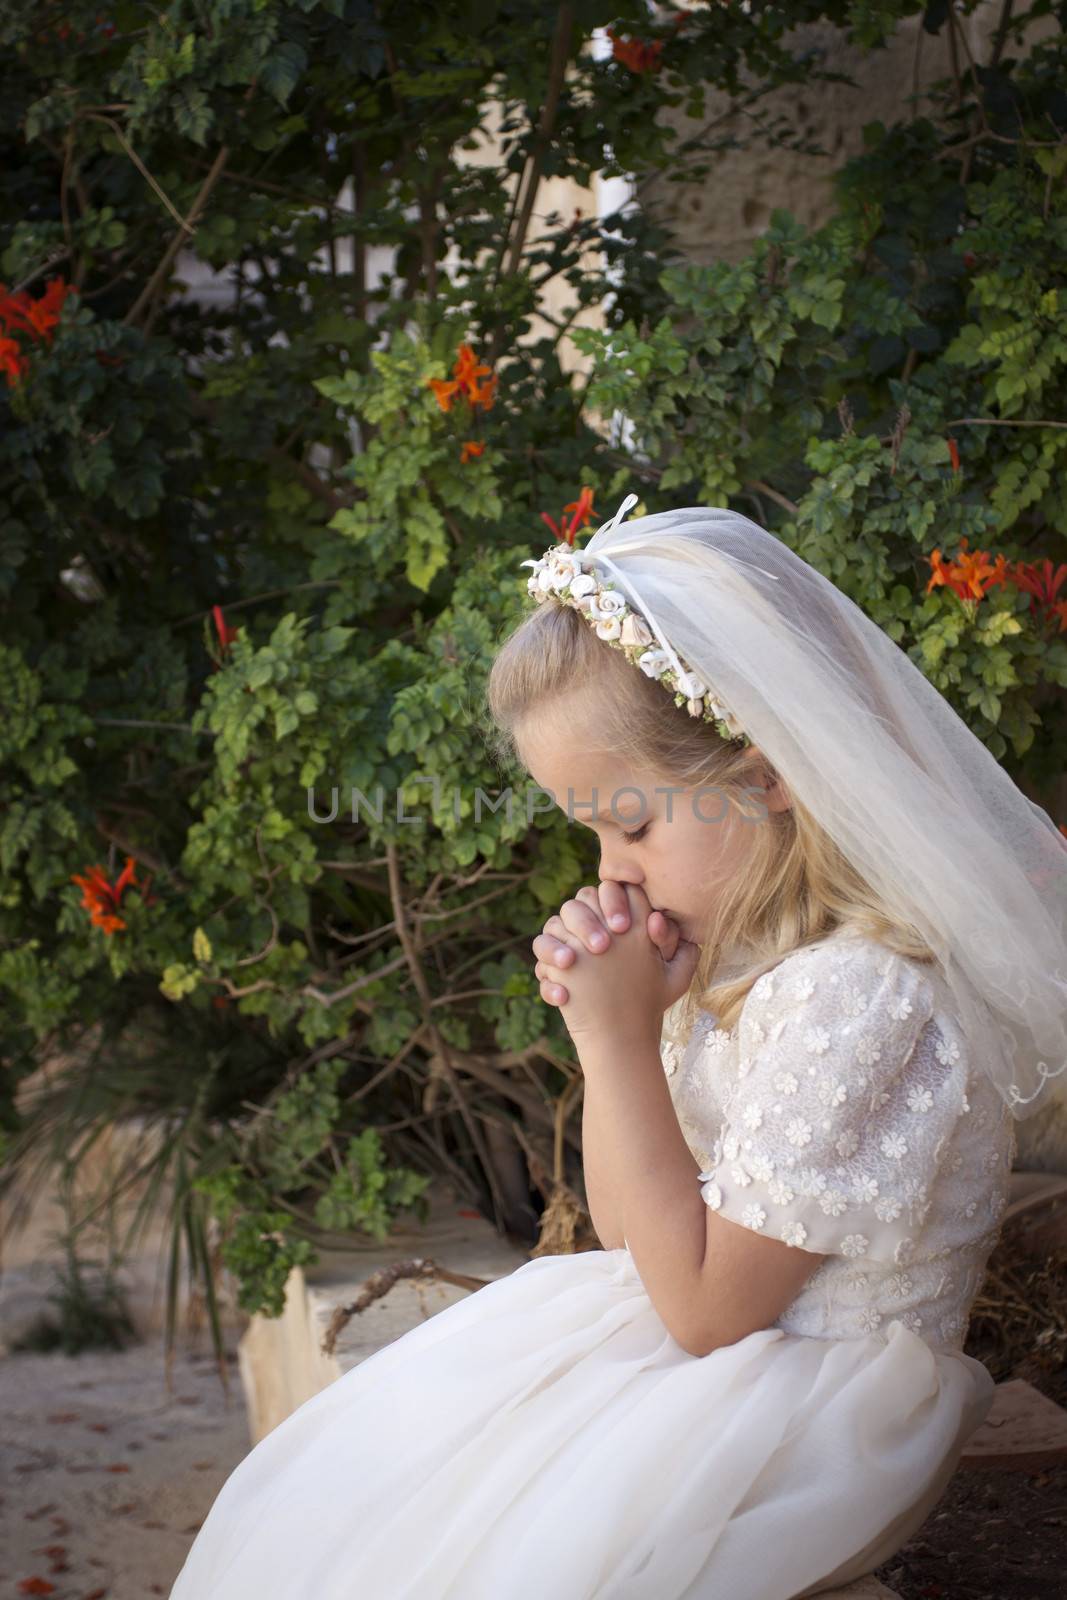 A young child praying during her first holy communion